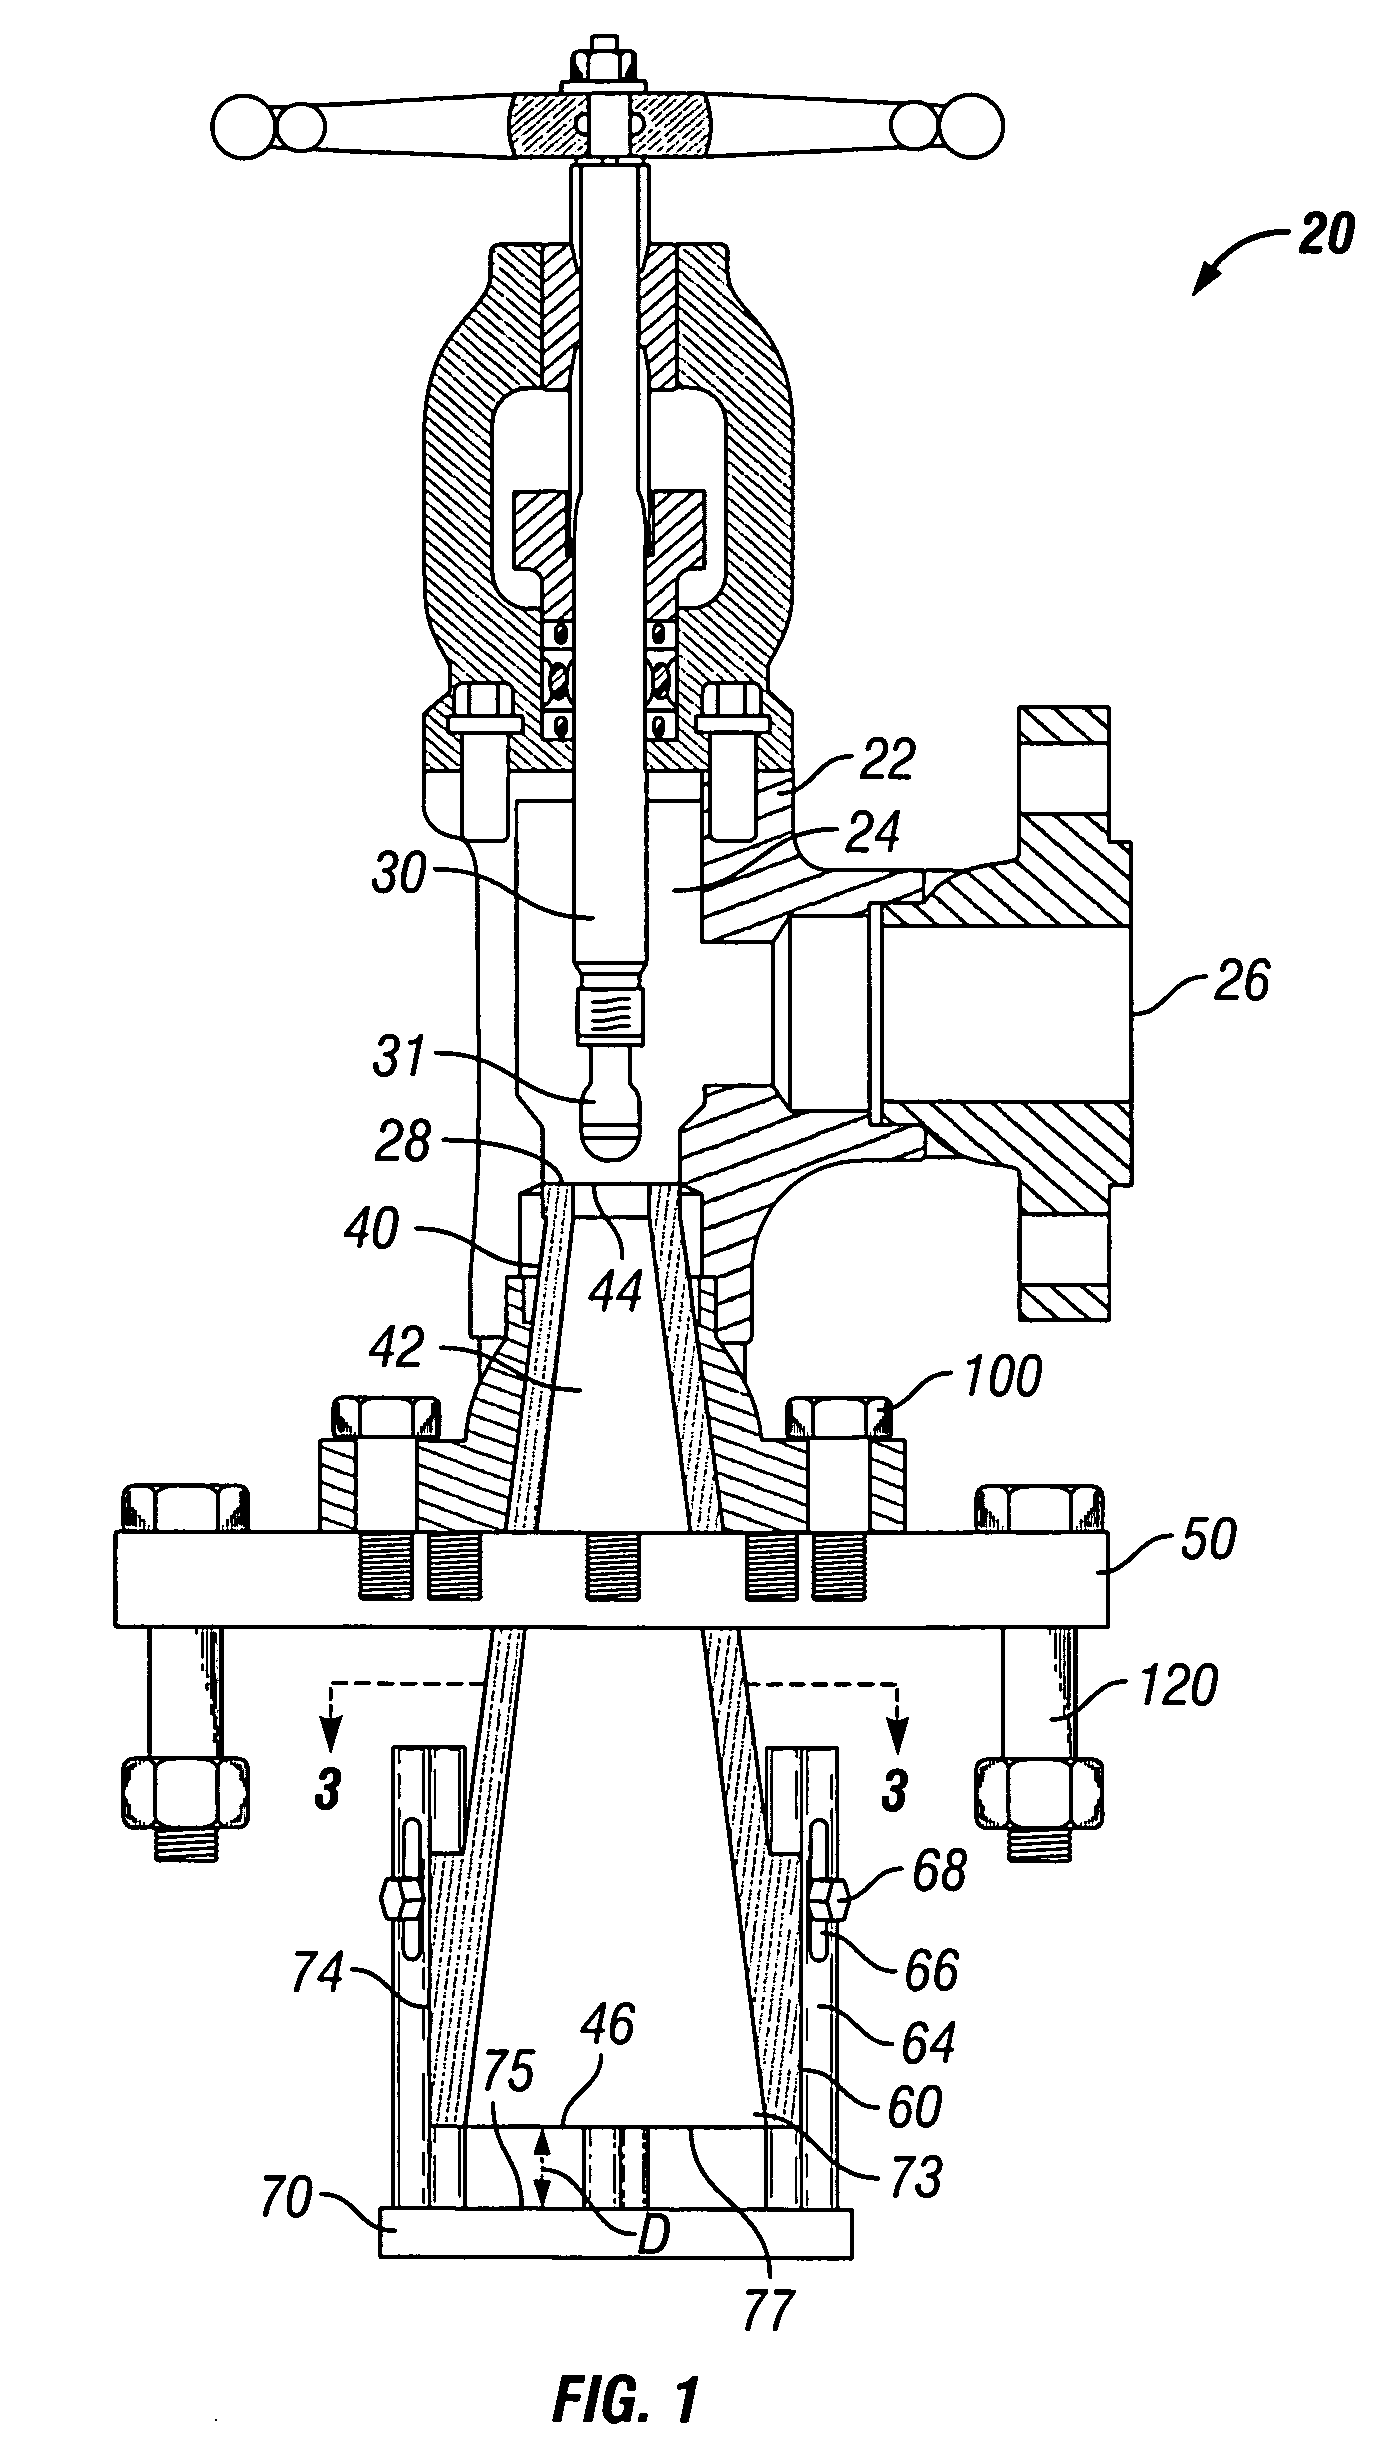 Nozzle assembly for separating hydrocarbon emulsions and methods of separating hydrocarbon emulsions